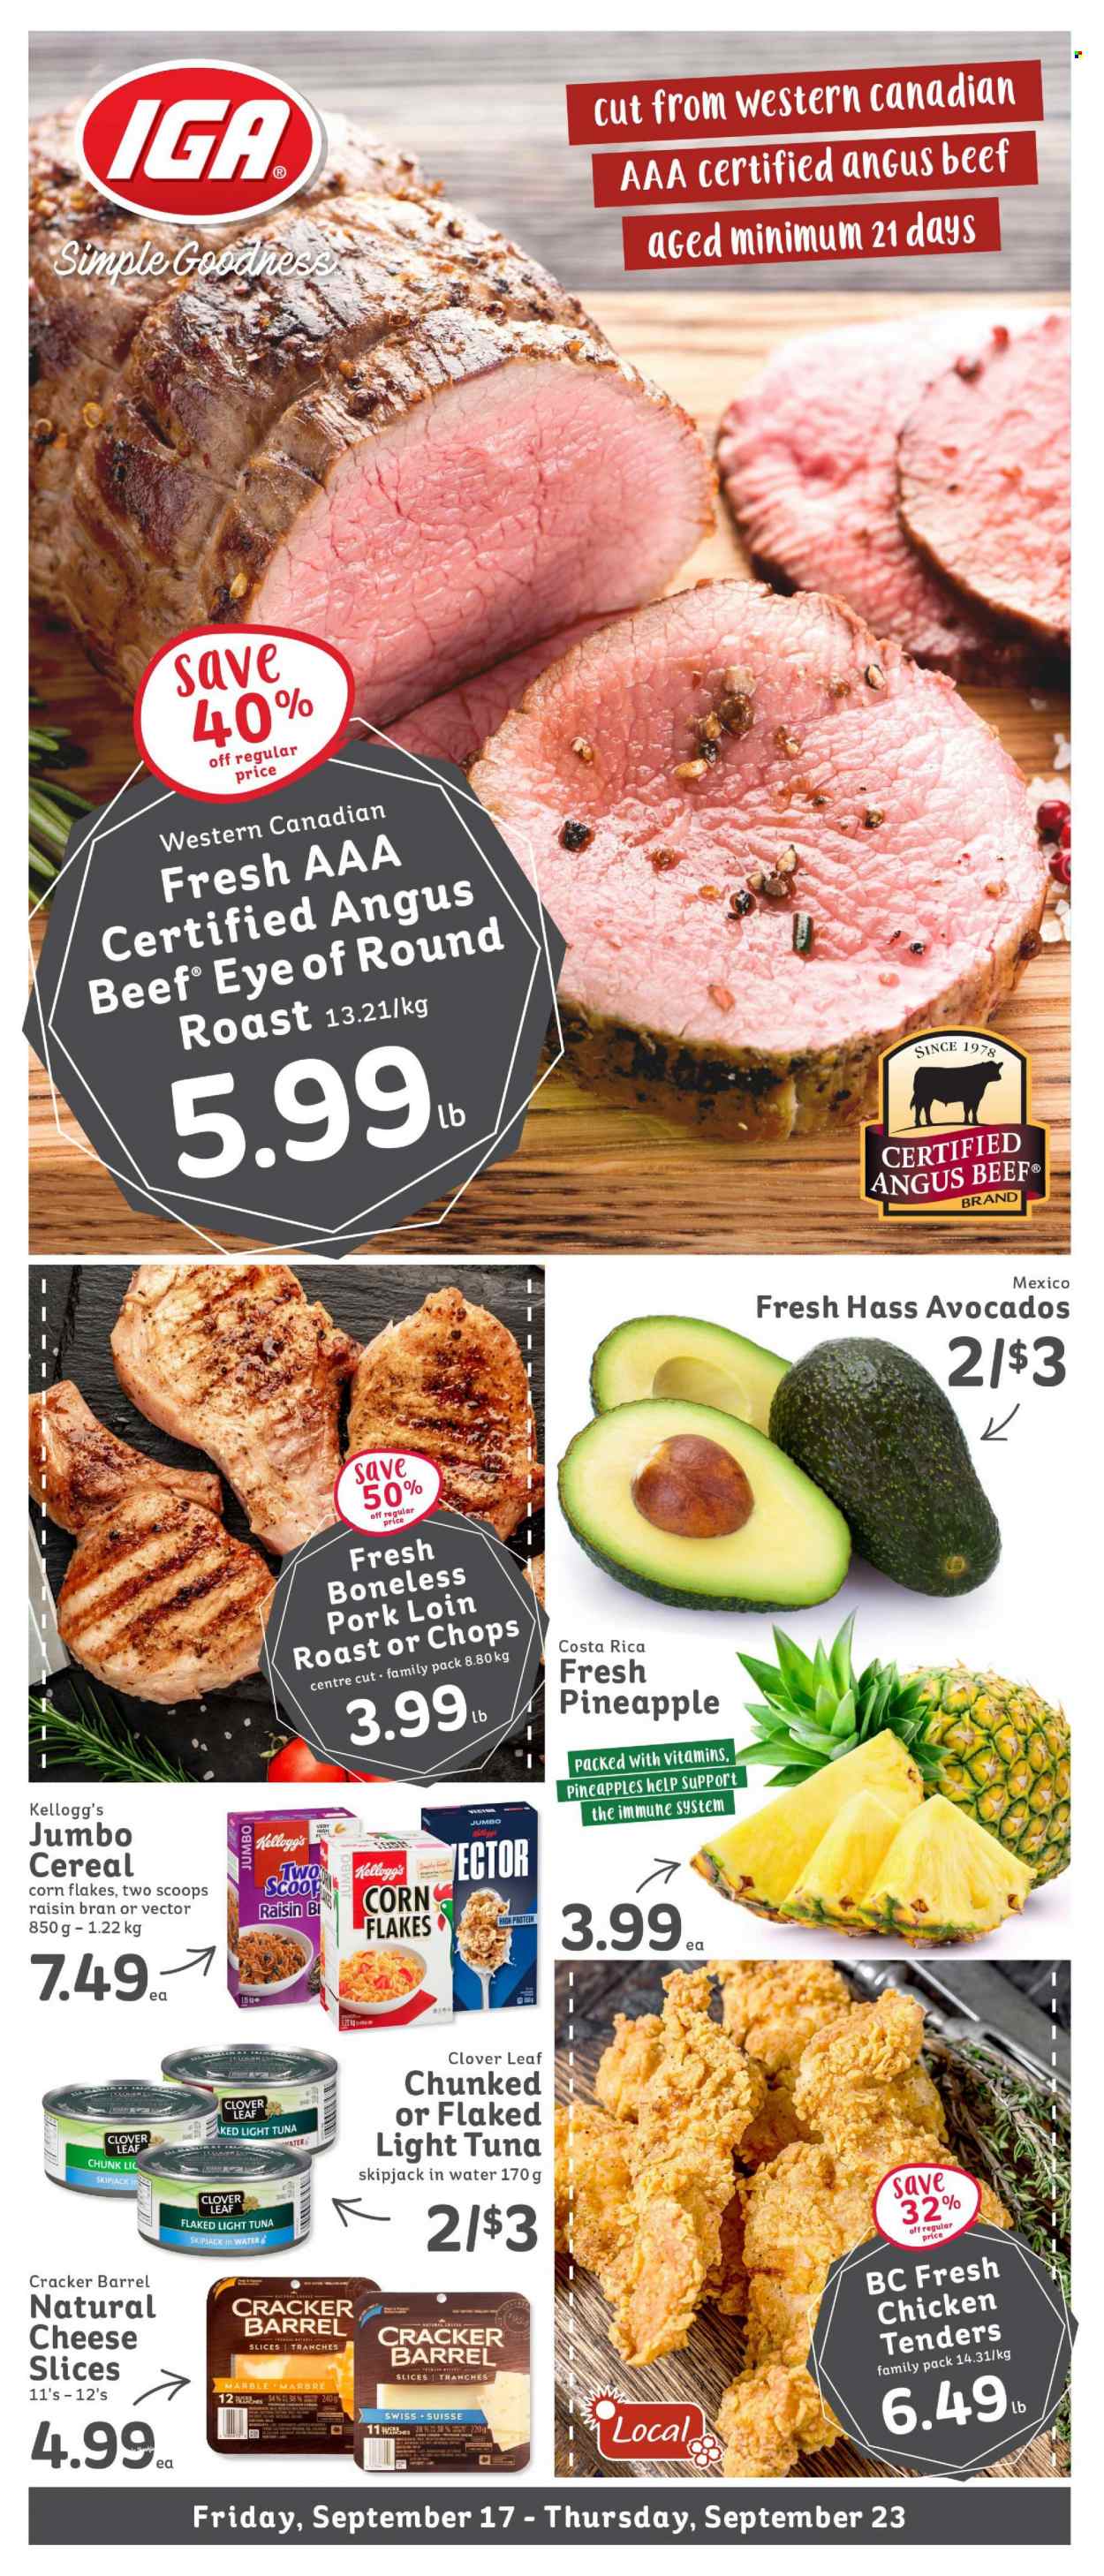 thumbnail - IGA Simple Goodness Flyer - September 17, 2021 - September 23, 2021 - Sales products - avocado, pineapple, tuna, chicken tenders, sliced cheese, cheese, Clover, crackers, Kellogg's, light tuna, cereals, corn flakes, Raisin Bran, beef meat, eye of round, round roast, pork loin, pork meat. Page 1.